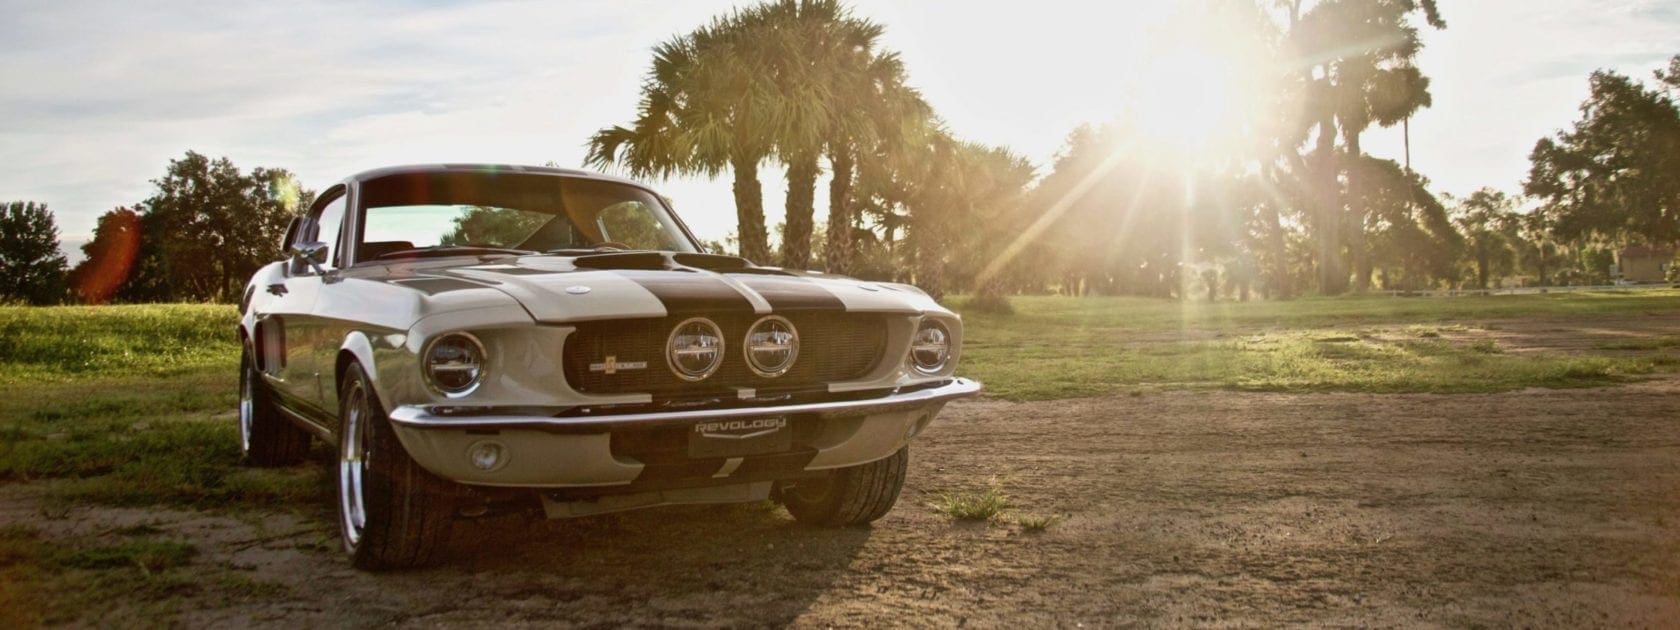 Tested: 1967 Revology Shelby Mustang GT500 Makes the Old New Again